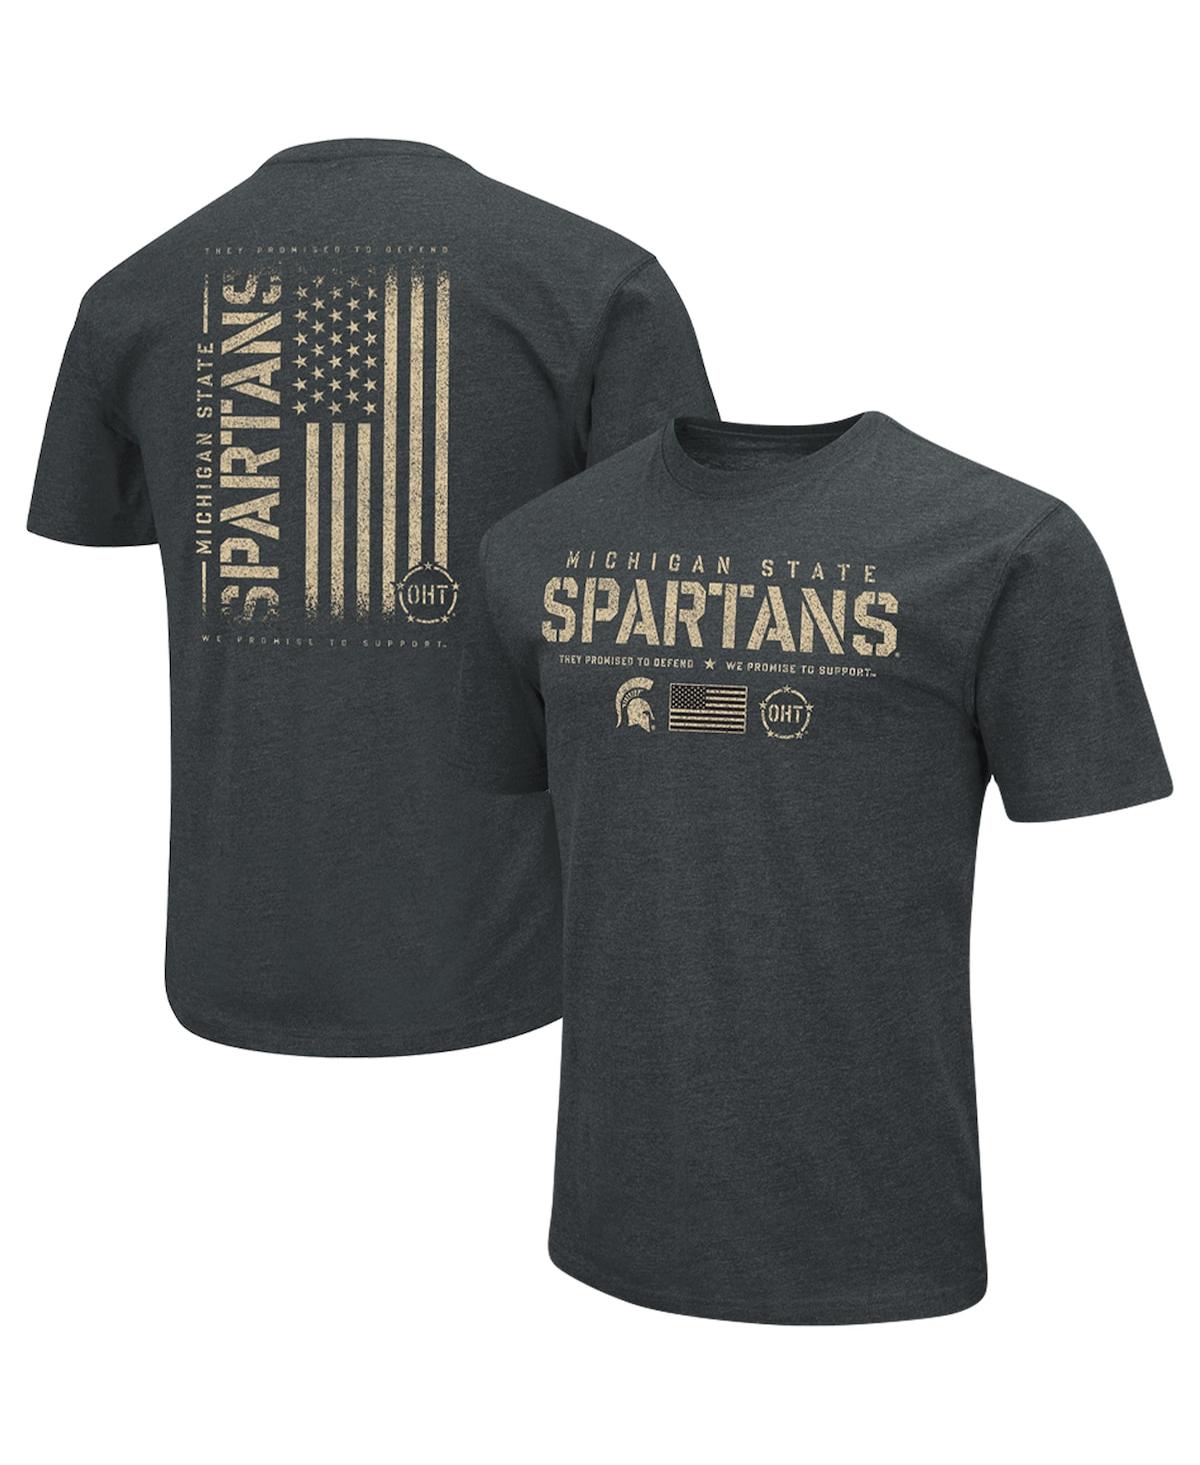 Men's Colosseum Heathered Black Michigan State Spartans Oht Military-Inspired Appreciation Flag 2.0 T-shirt - Heathered Black